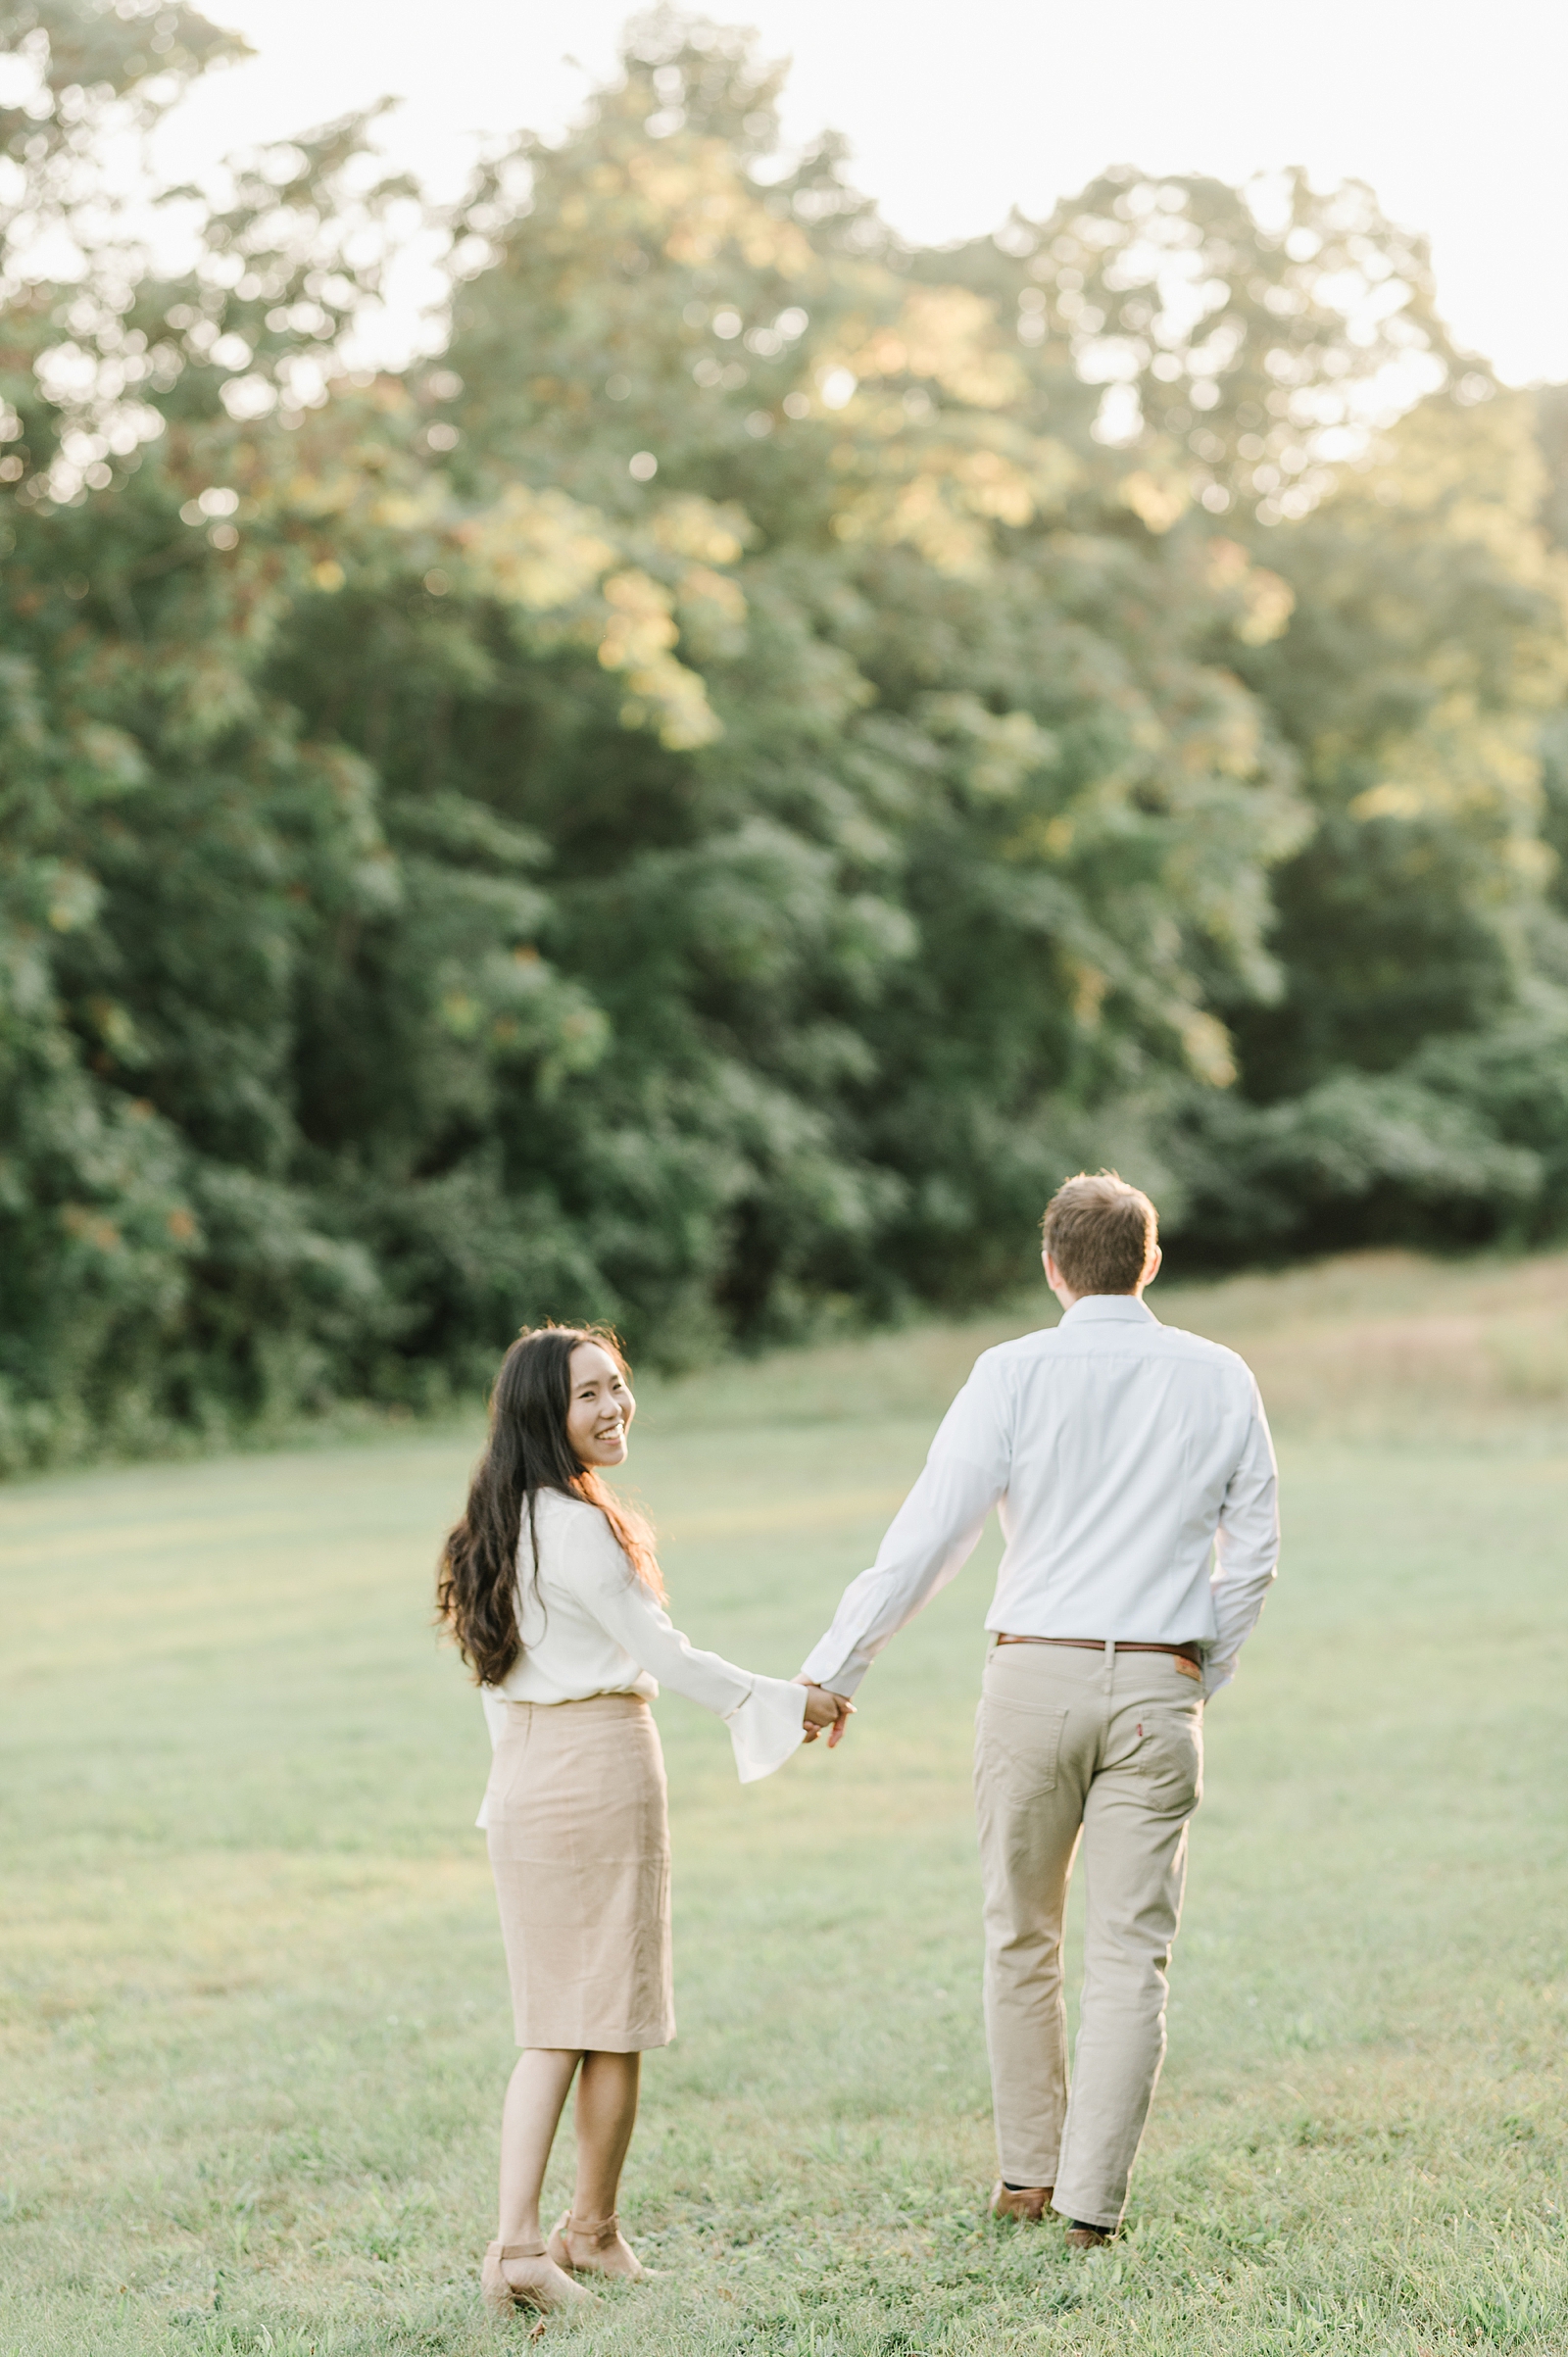 Early Fall Anniversary Session at Lyman Estate in Waltham, MA by Boston Wedding Photographer Annmarie Swift